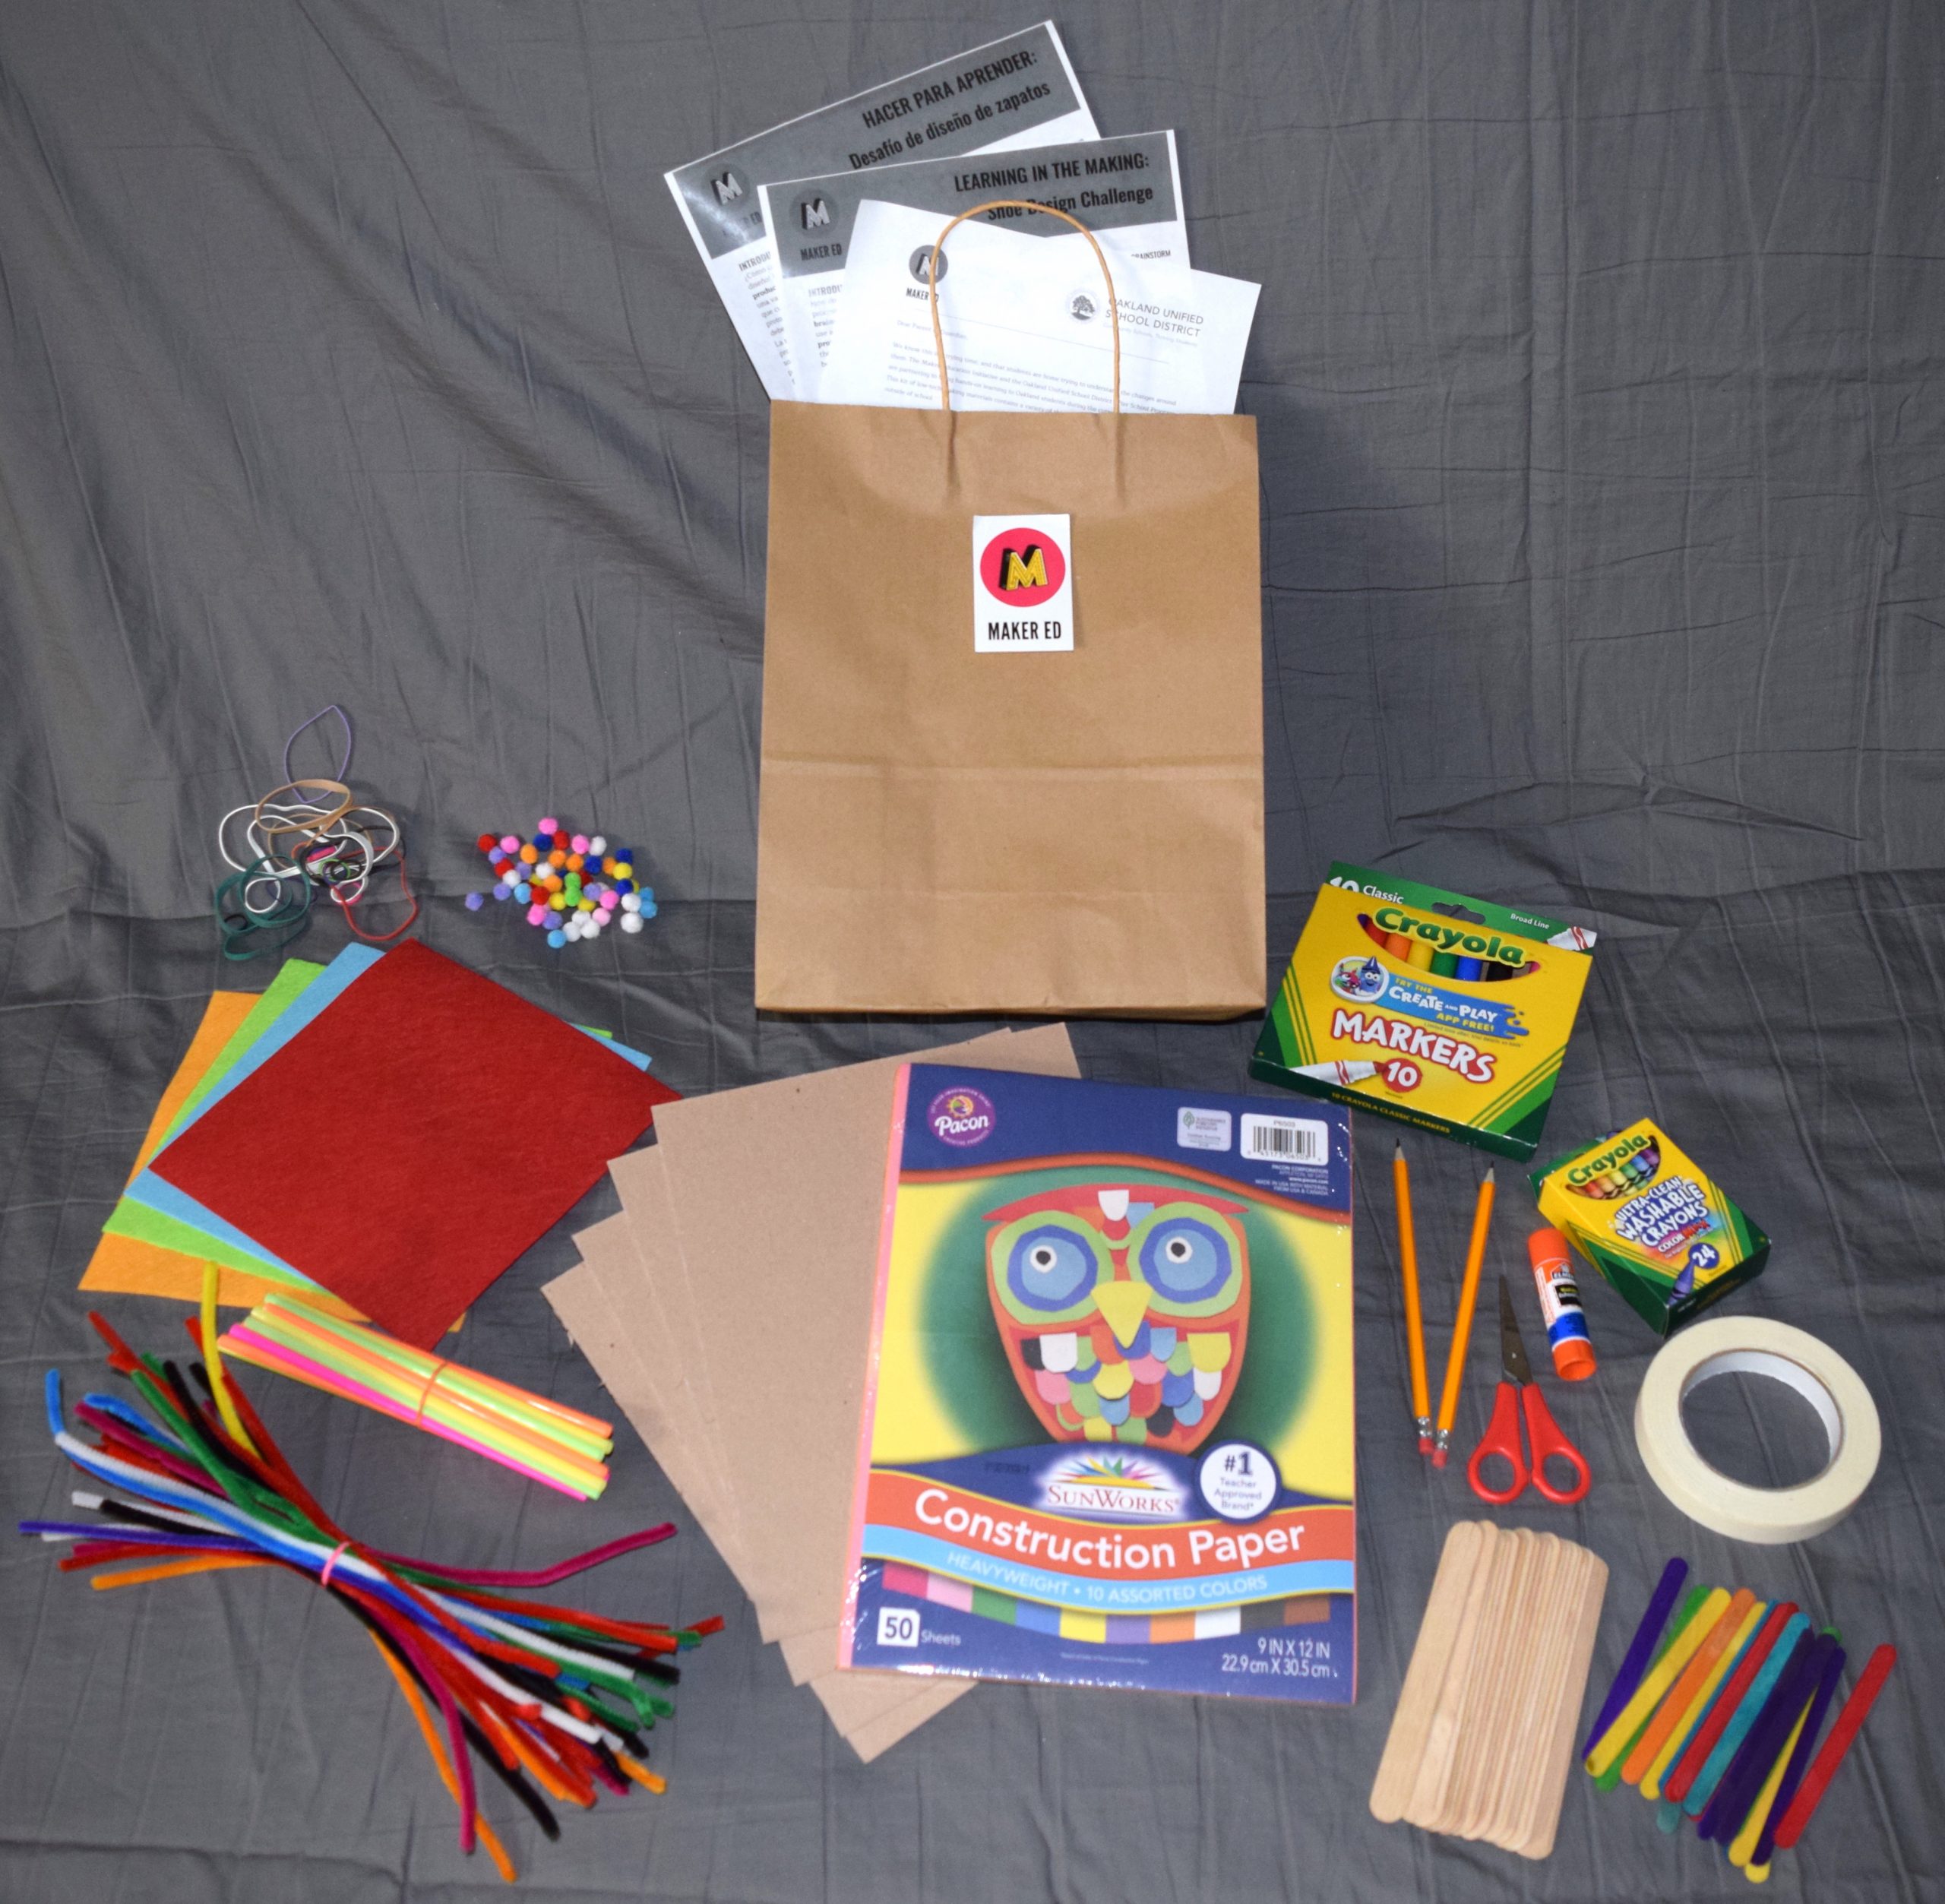 Supporting Oakland Youth with Hands-On Learning Through Home Maker Kits